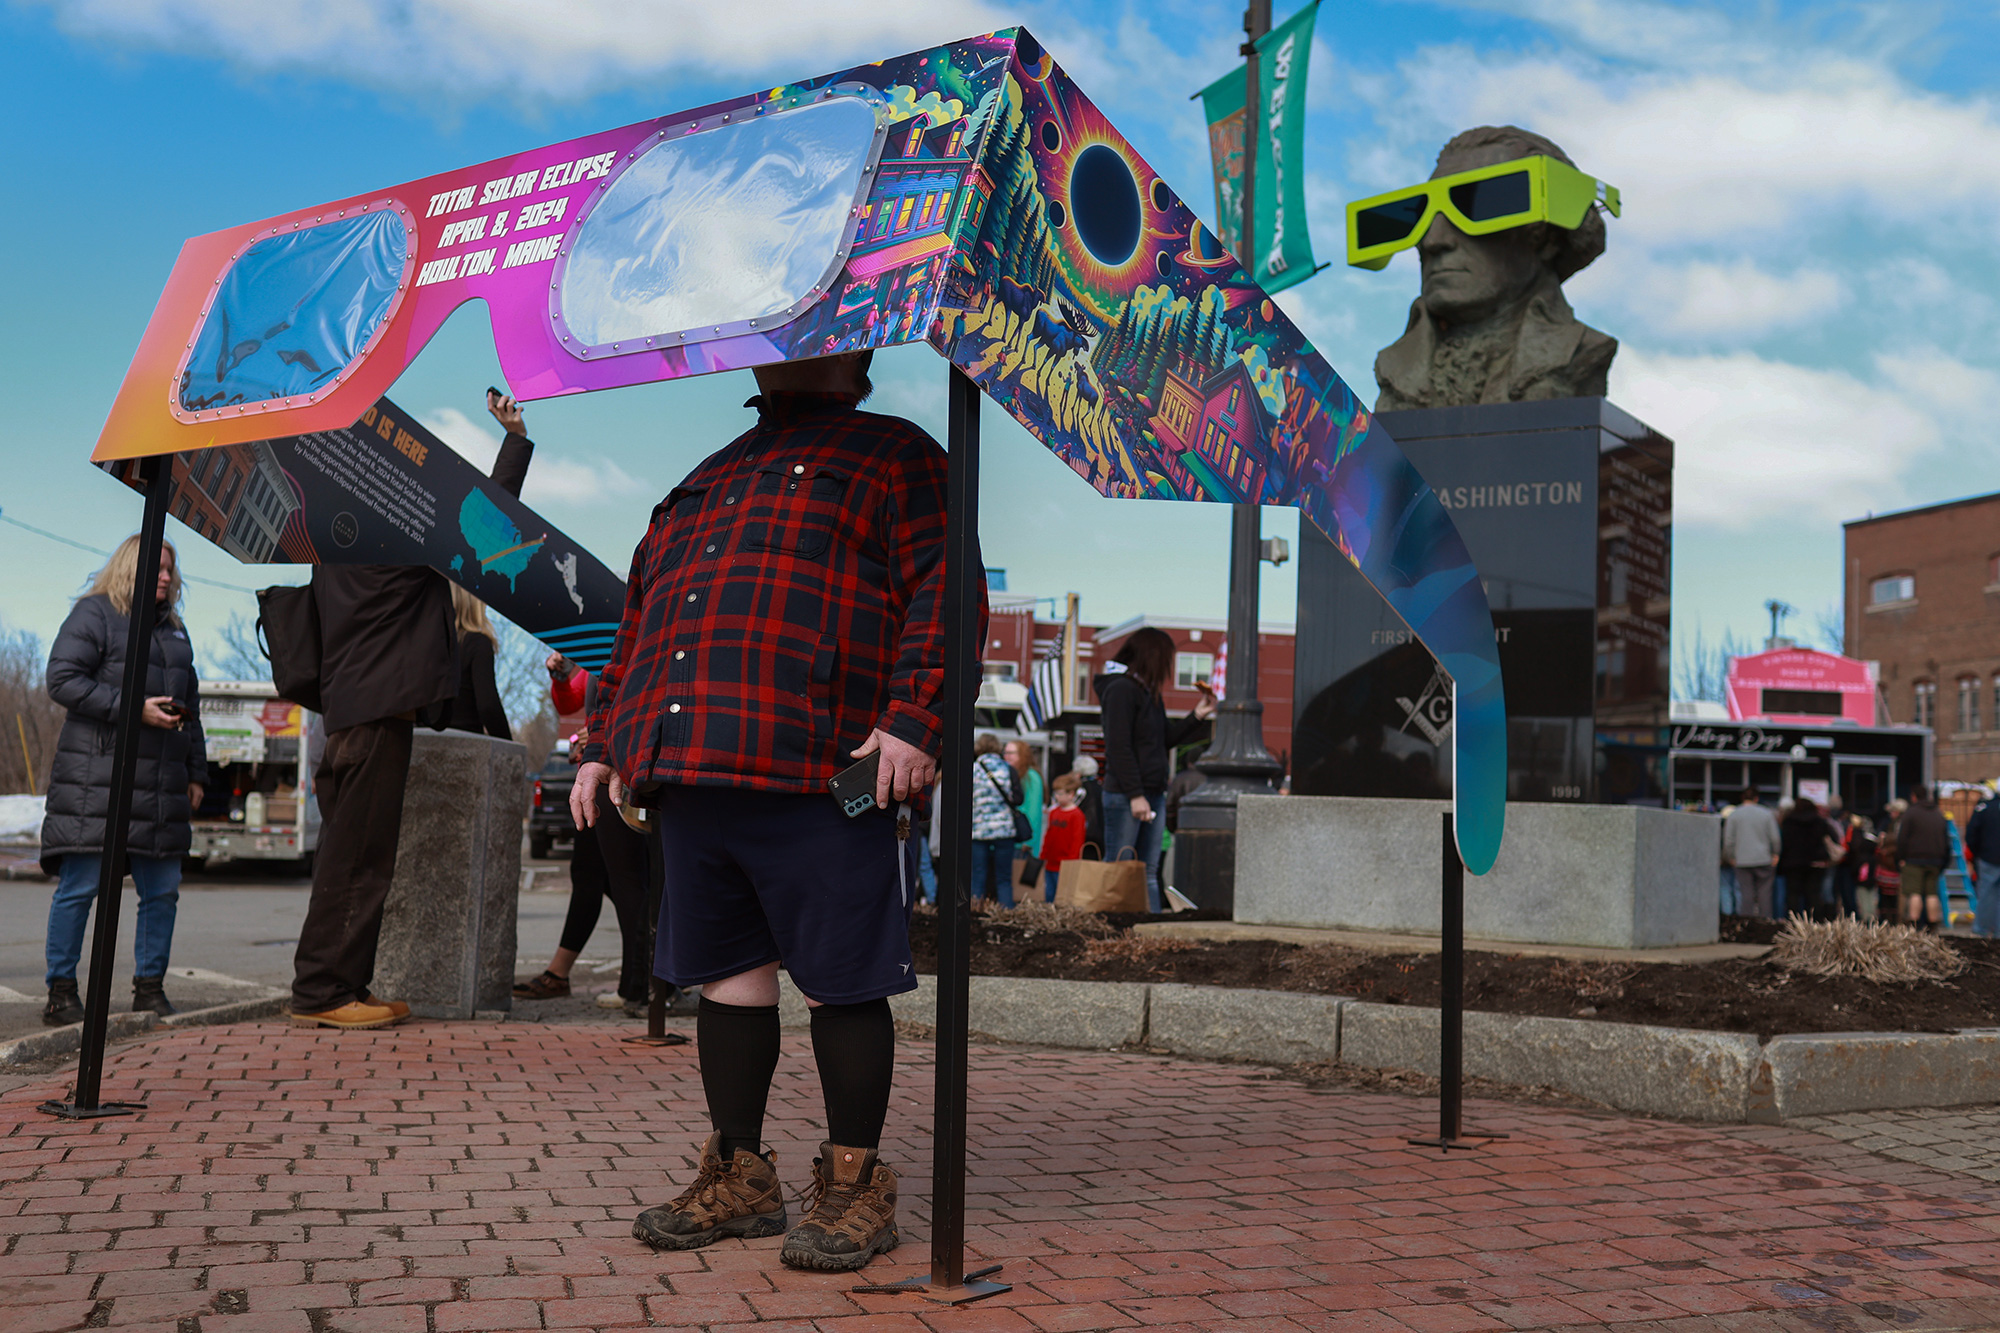 Visitors look through a pair of oversized eclipse glasses set up in the town square in Houlton, Maine, on Sunday.